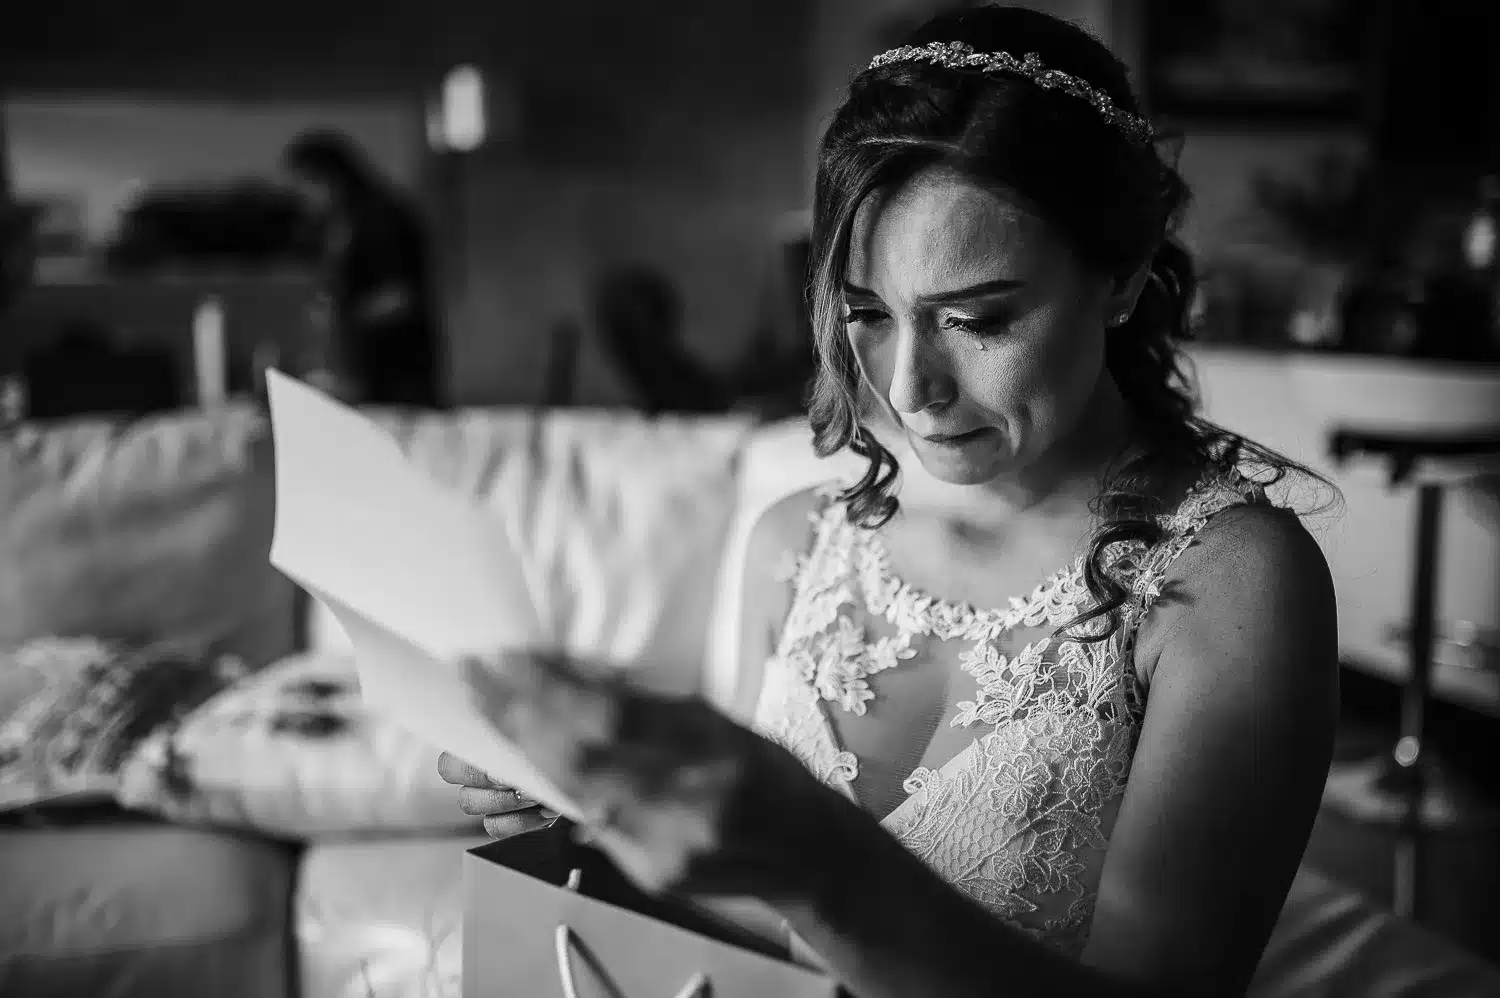 Emotional Bride reading a letter from the groom with a special gift he gave her to wear at the wedding during the final moments of her getting ready | Costa Rica Wedding Photographer